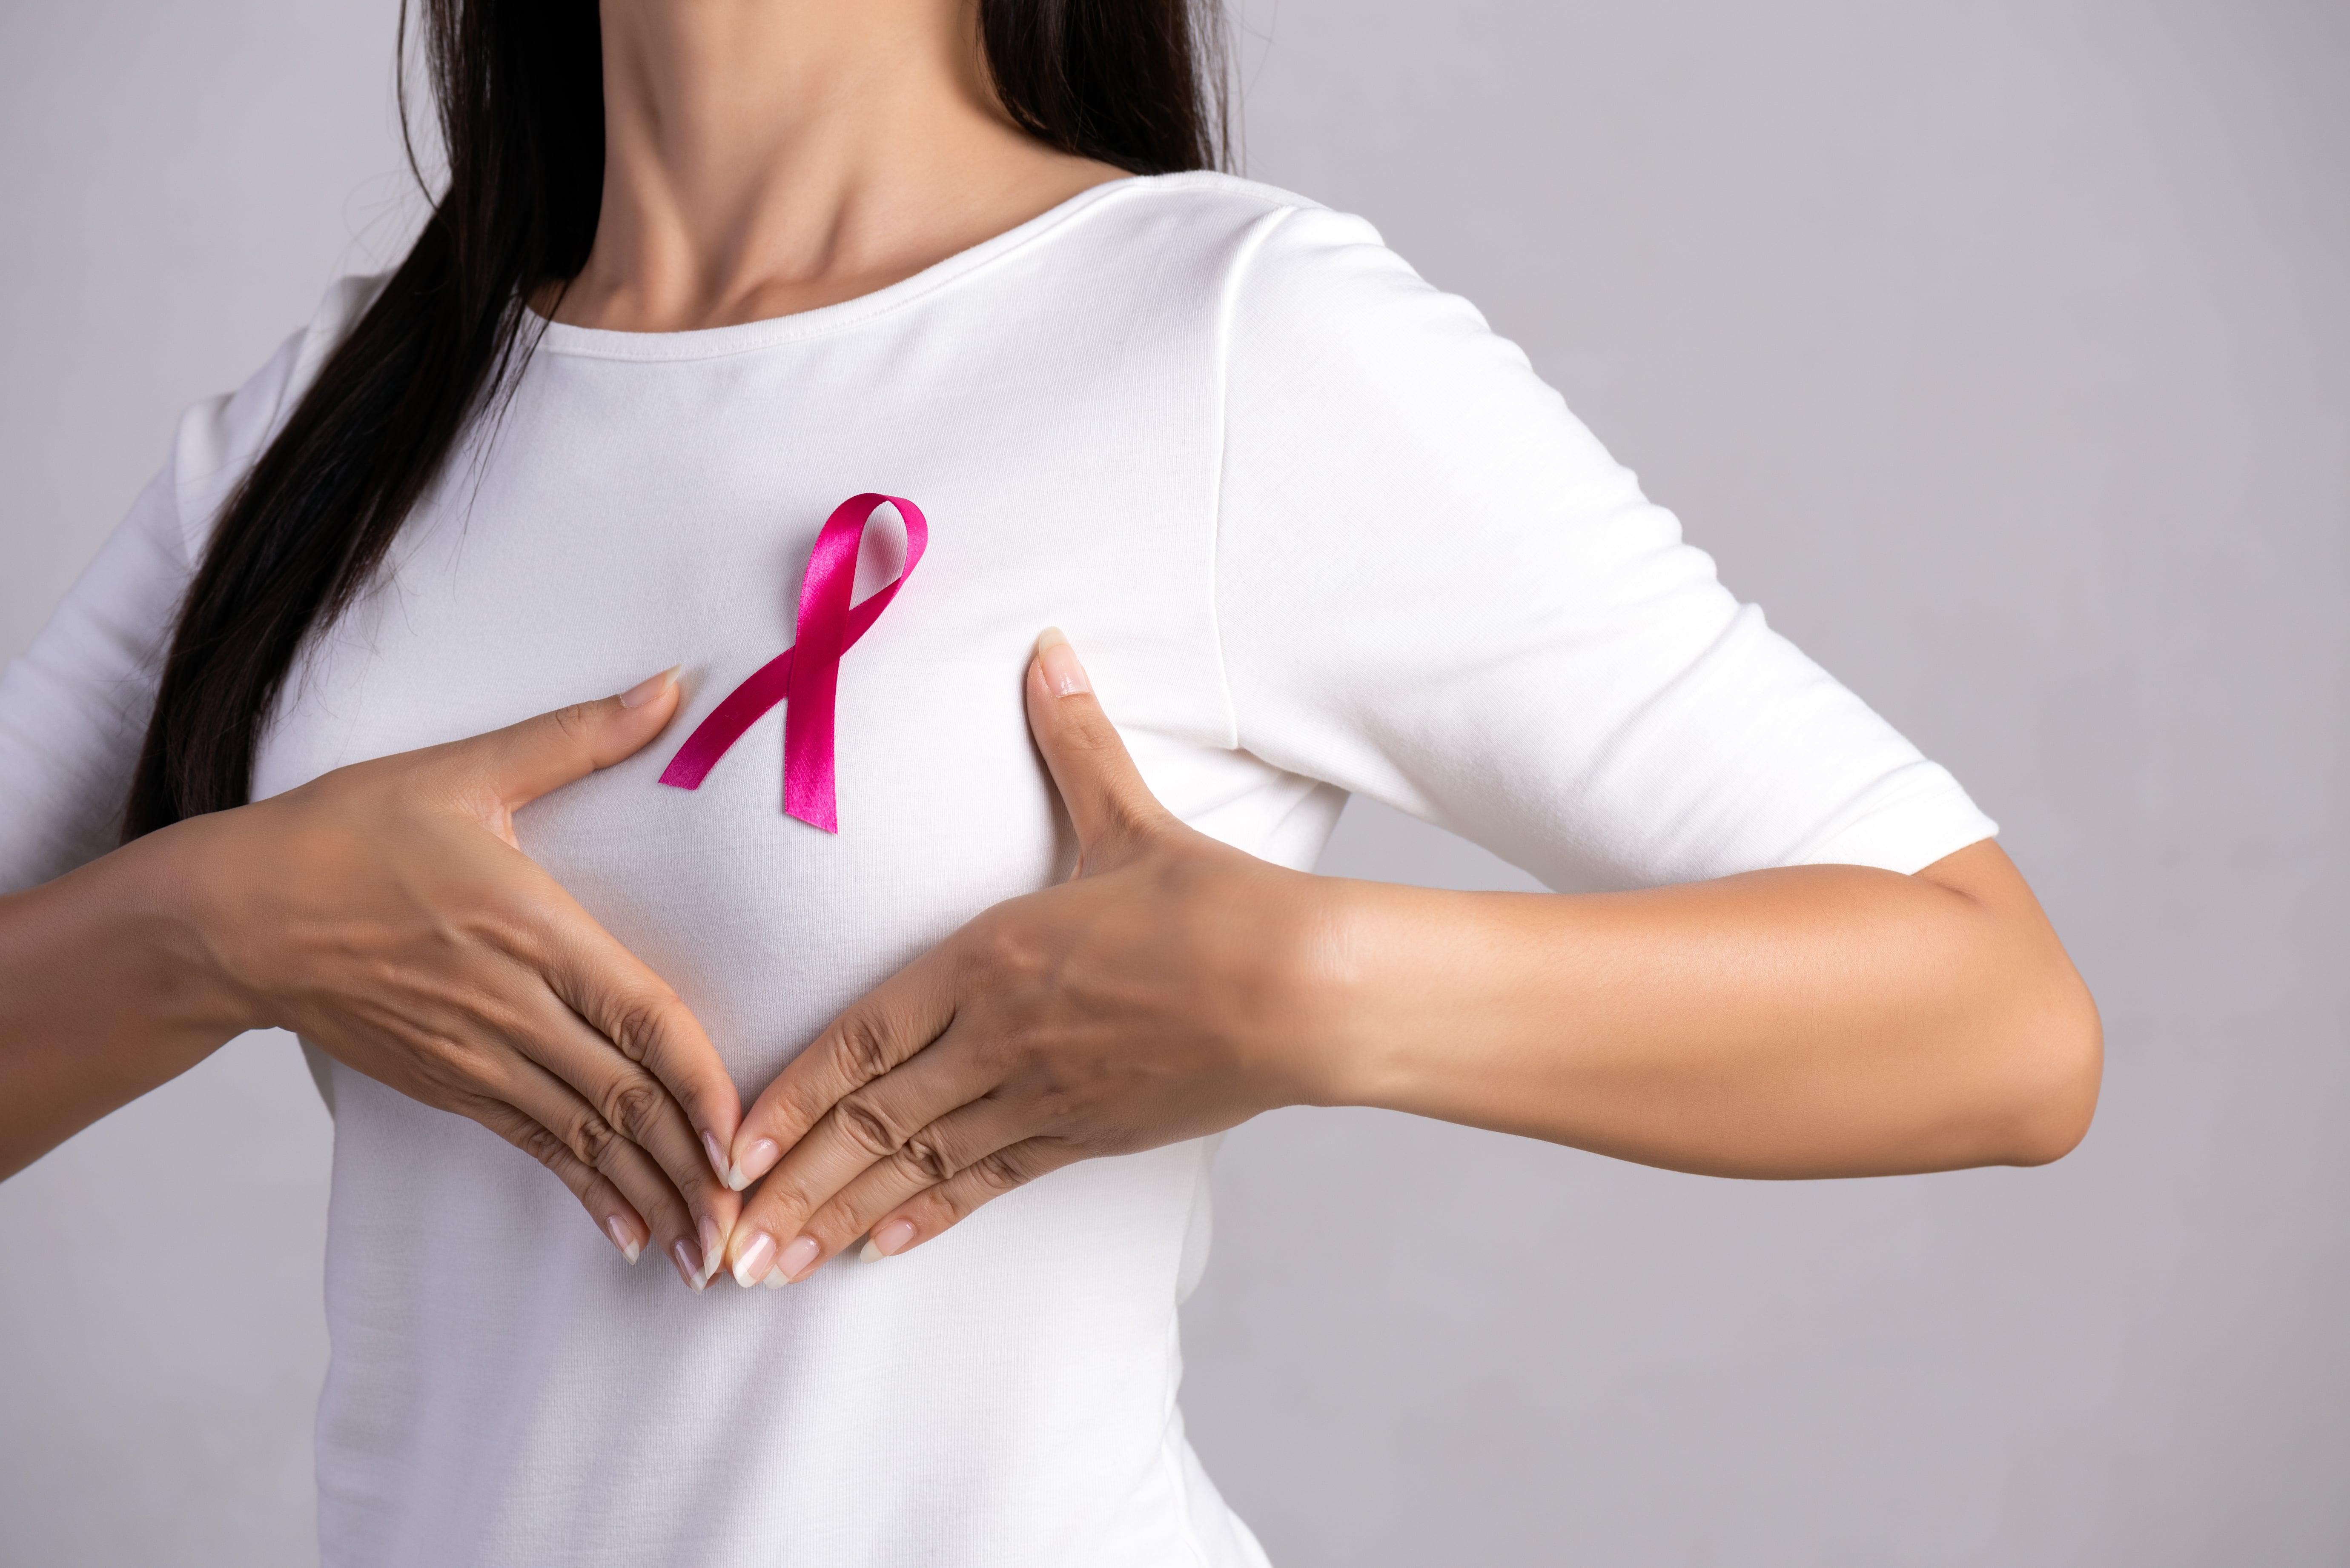 FREQUENTLY ASKED QUESTIONS ABOUT BREAST CANCER